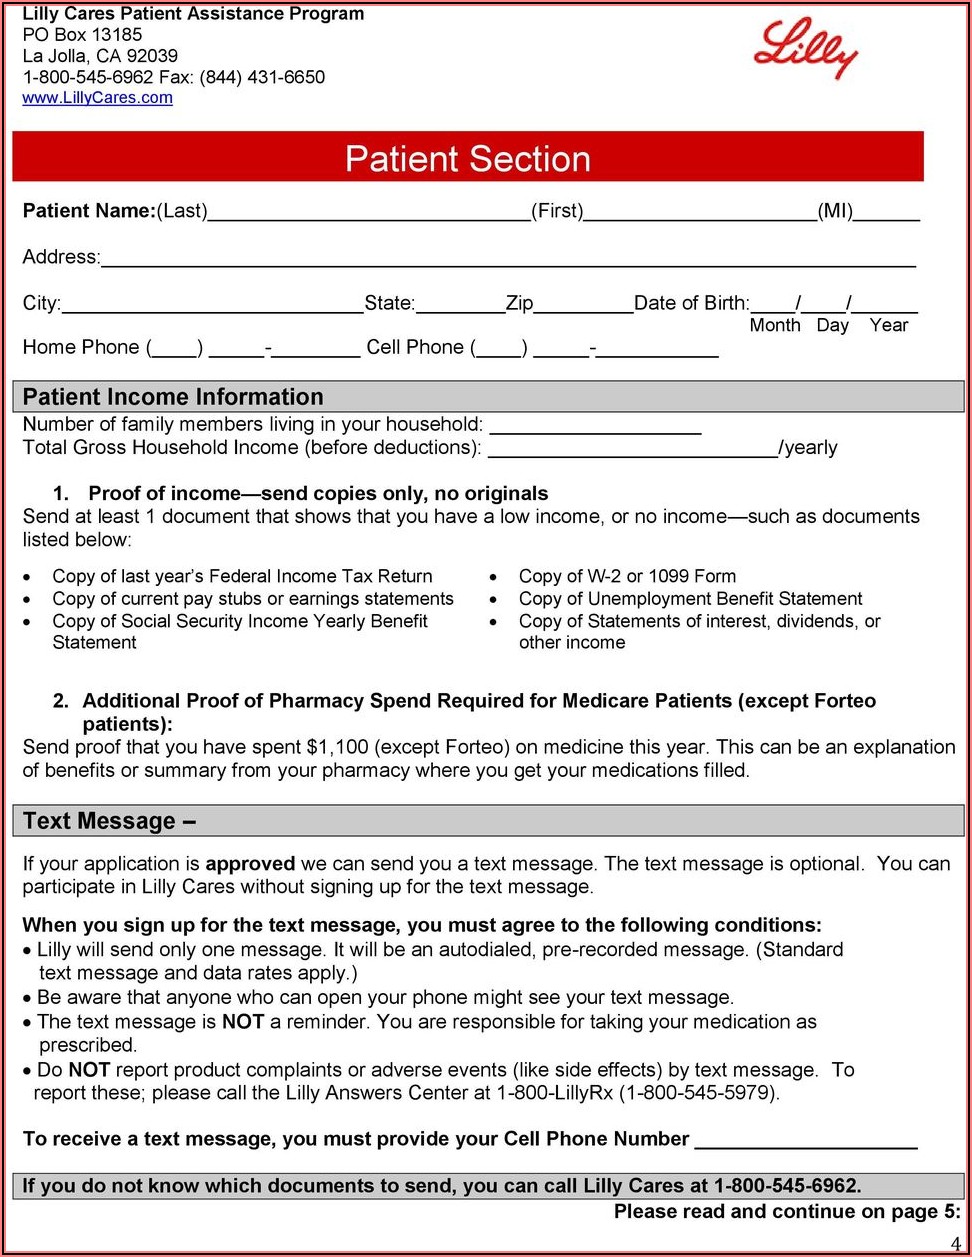 Lilly Cares Patient Assistance Program Refill Request Form